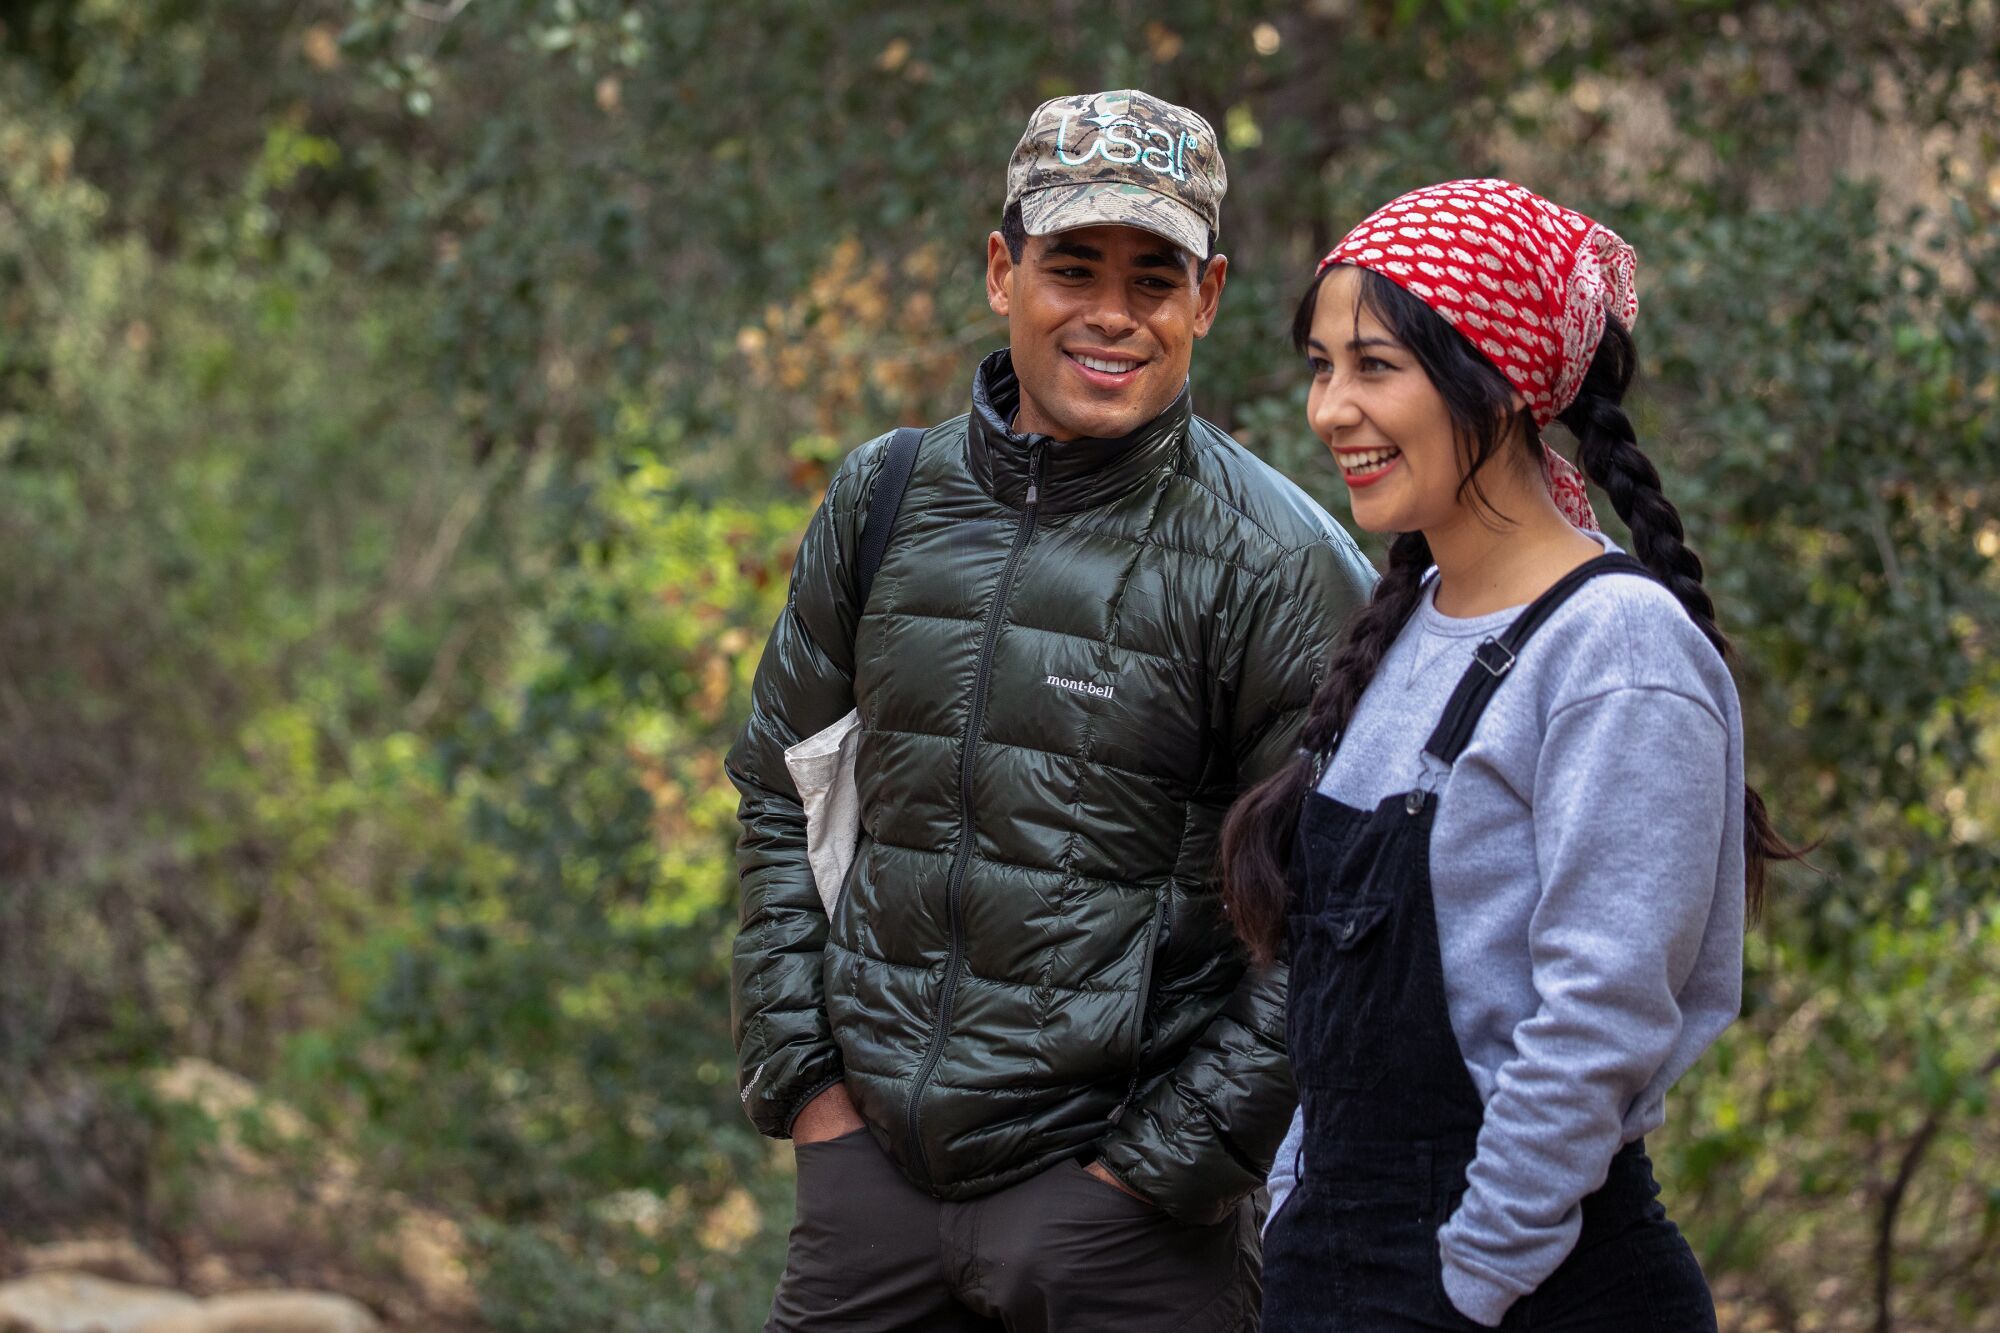 Usal Project founder Michael Washington stands with naturalist Andrea Jimenez during a nature walk. 